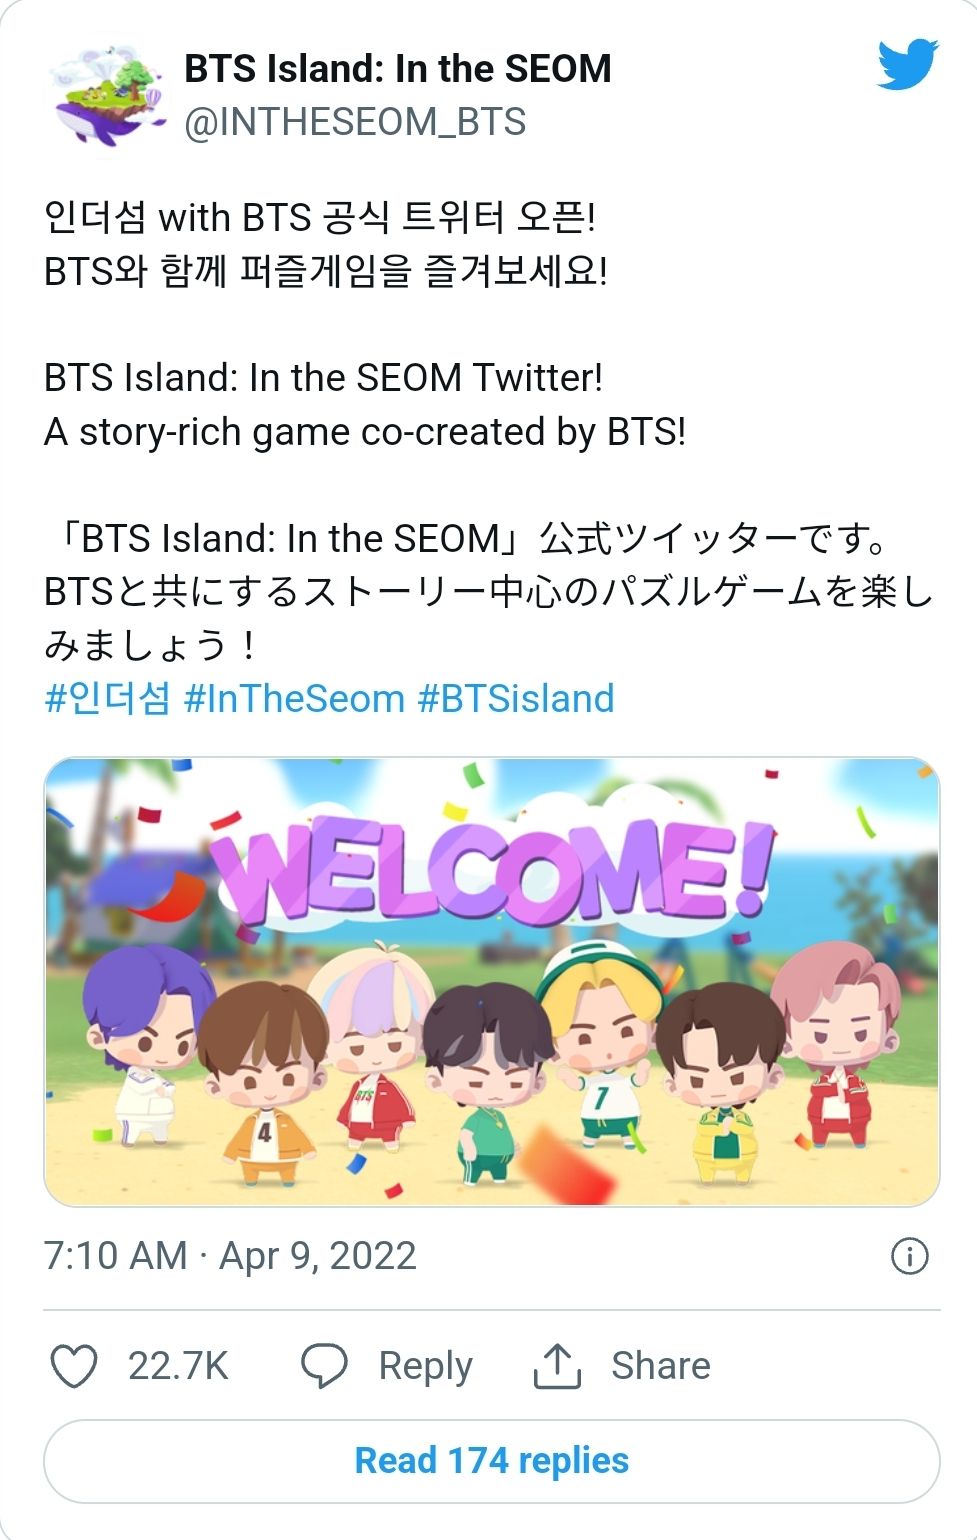 BTS Island: In the SEOM/Twitter/@INTHESEOM_BTS